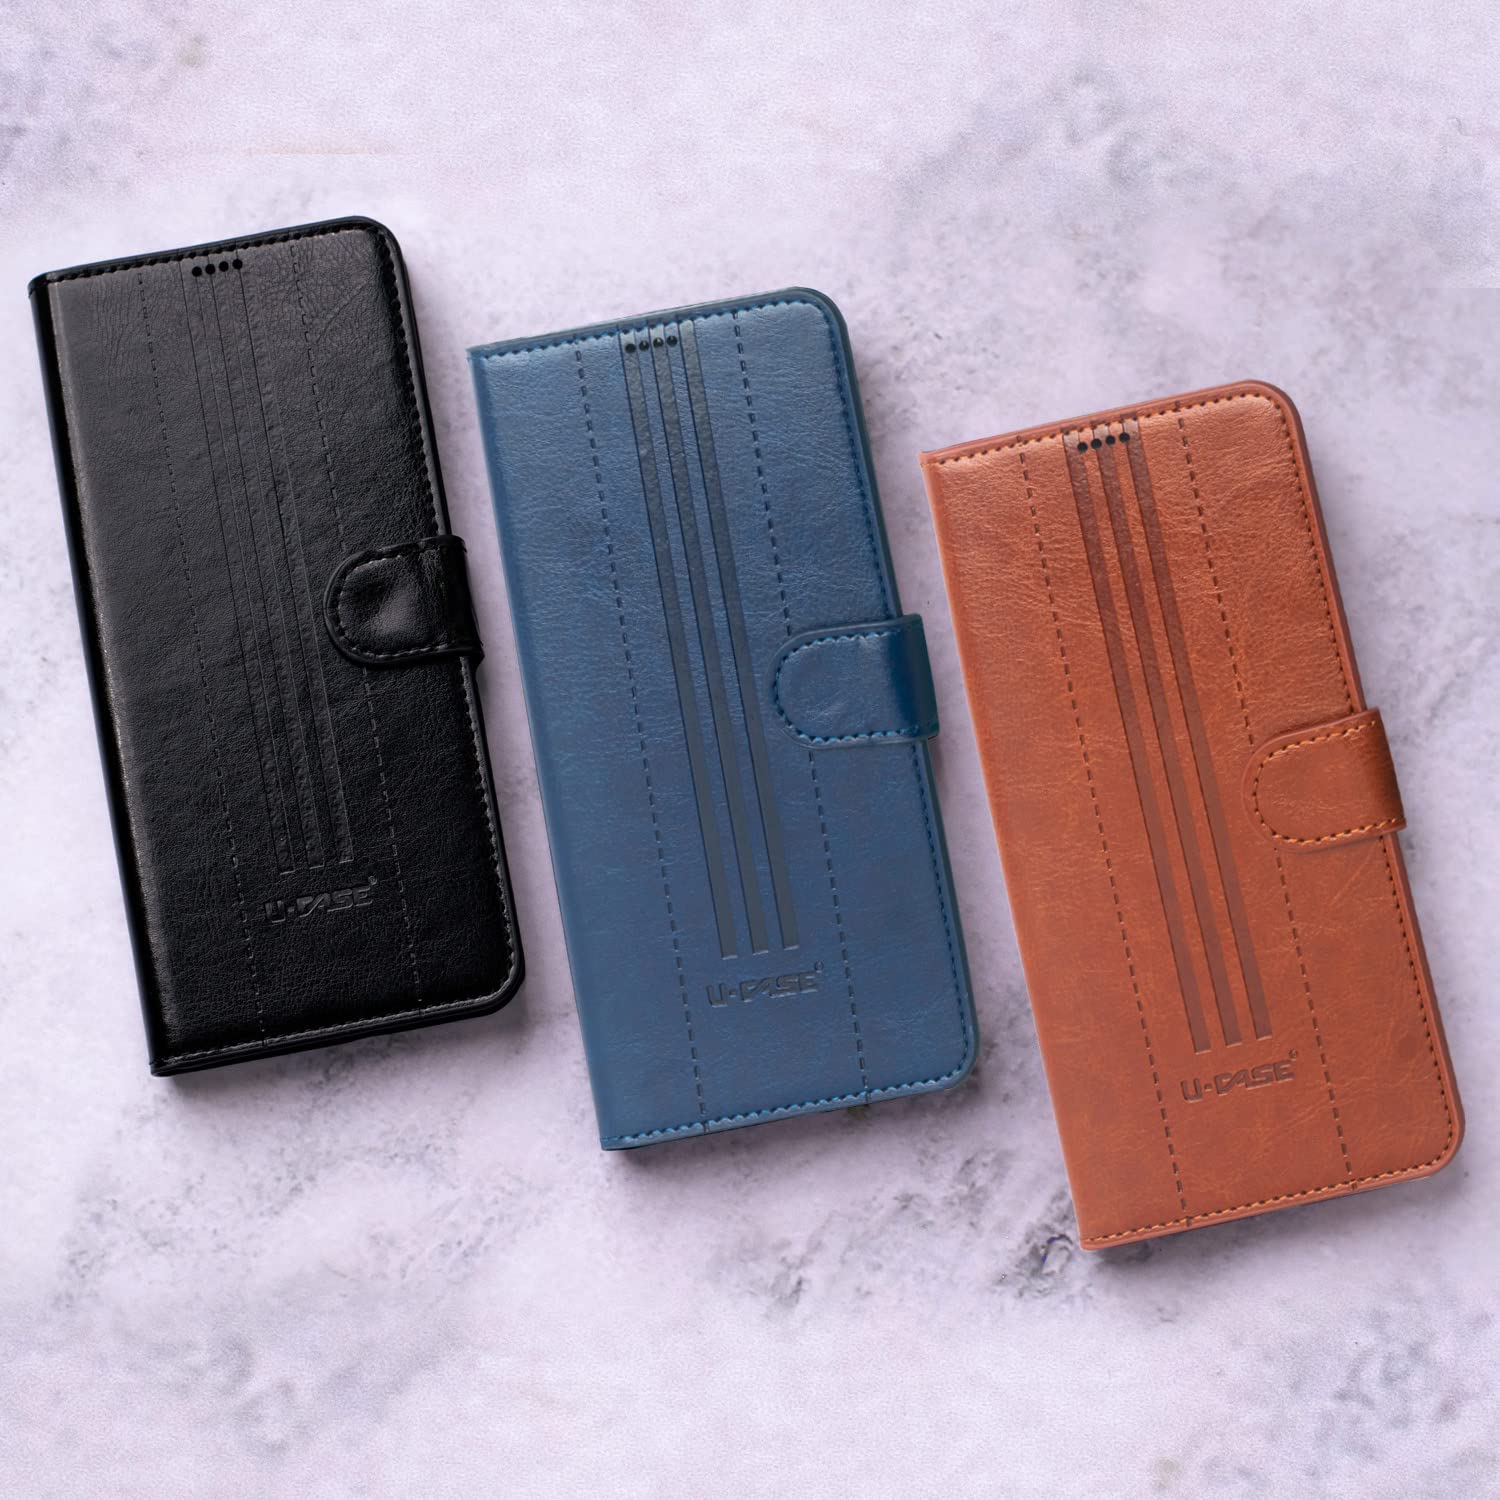 Shop U-CASE Flip Cover for Oppo A83 Vegan Foldable Stand & Pocket Magnetic Closure colors